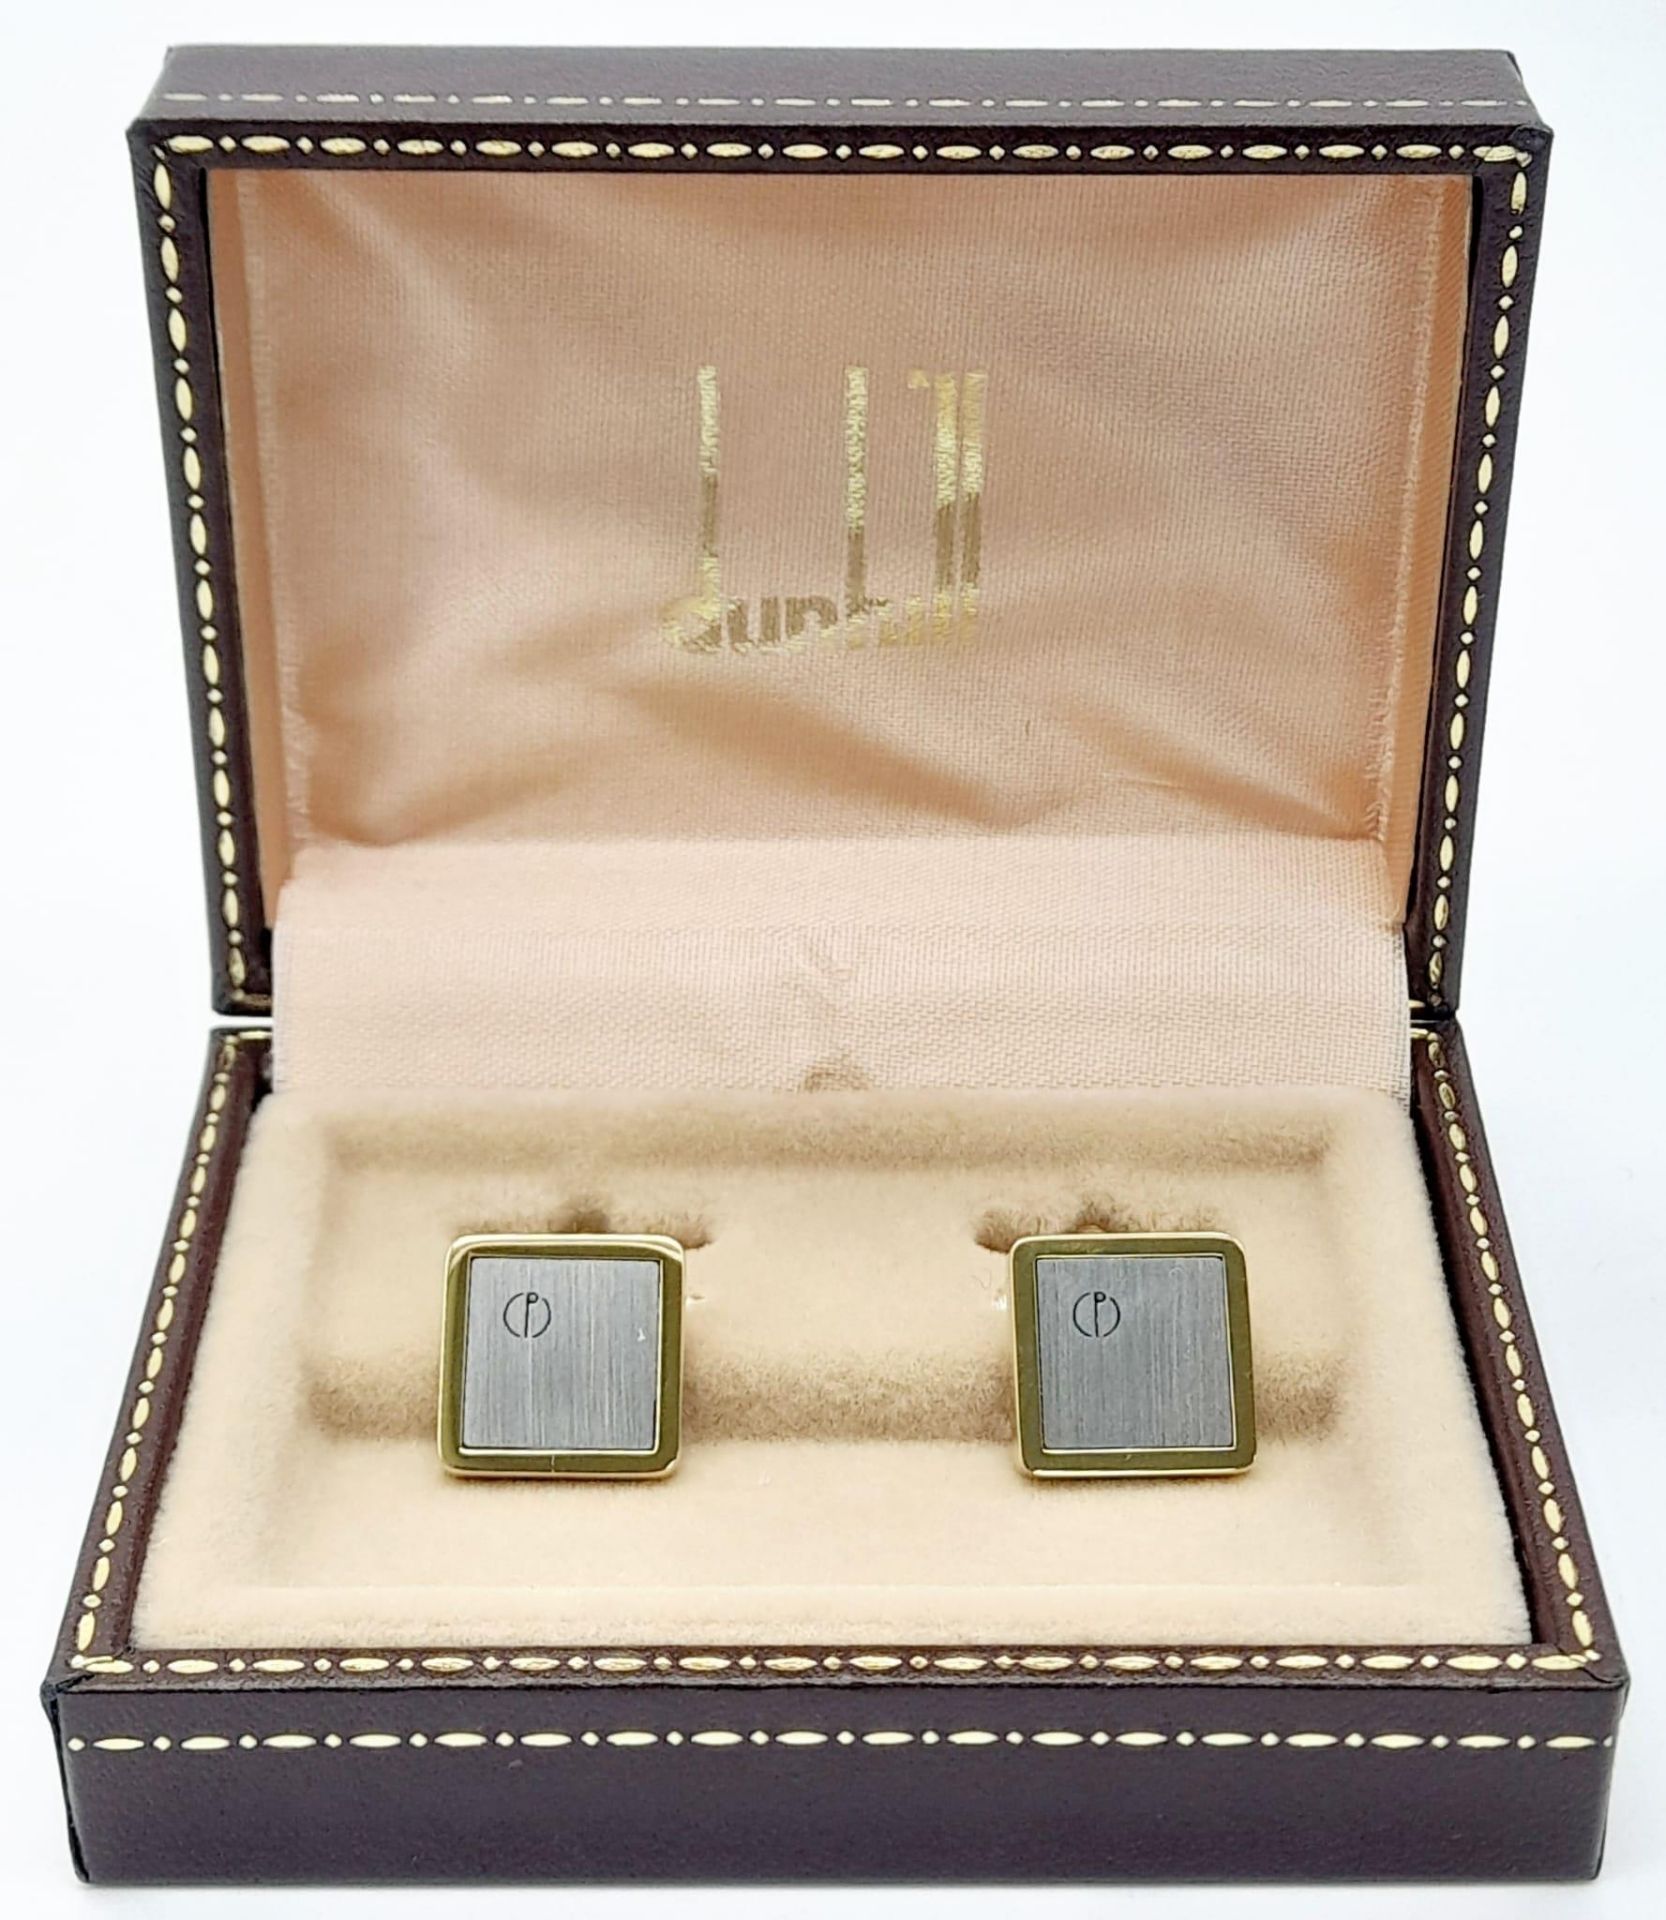 A Pair of Square Two-Tone Yellow Gold Gilt and Silver Panel Inset Cufflinks by Dunhill in their